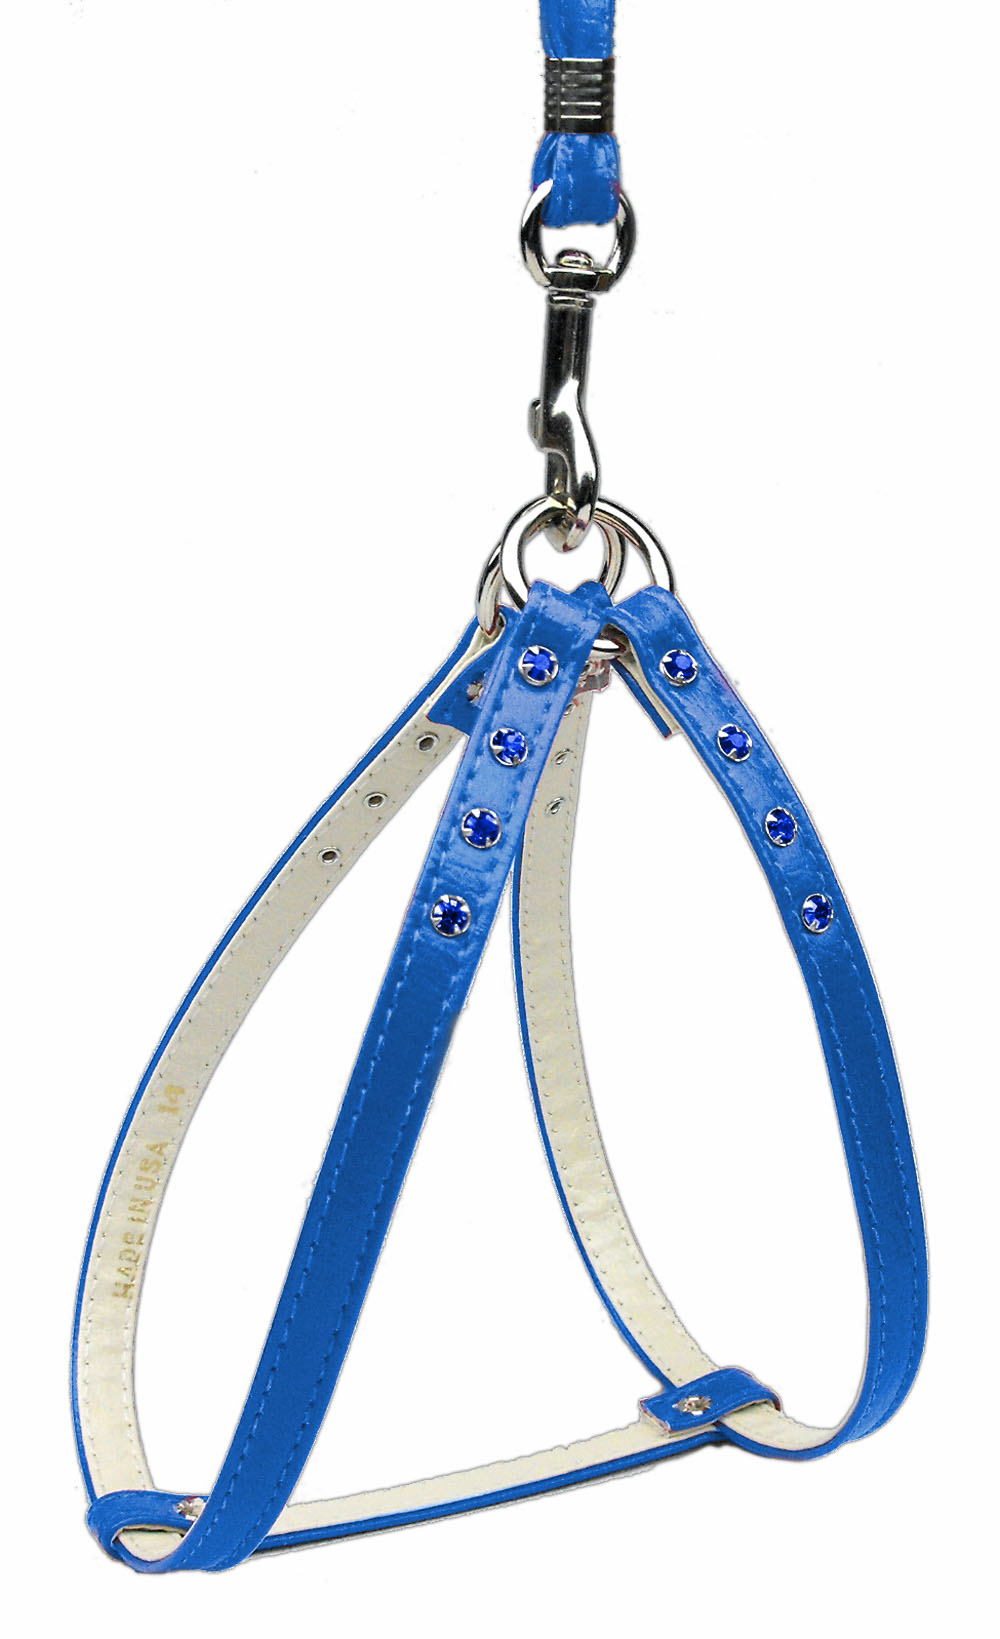 Step-In Harness Blue w/ Blue Stones 8